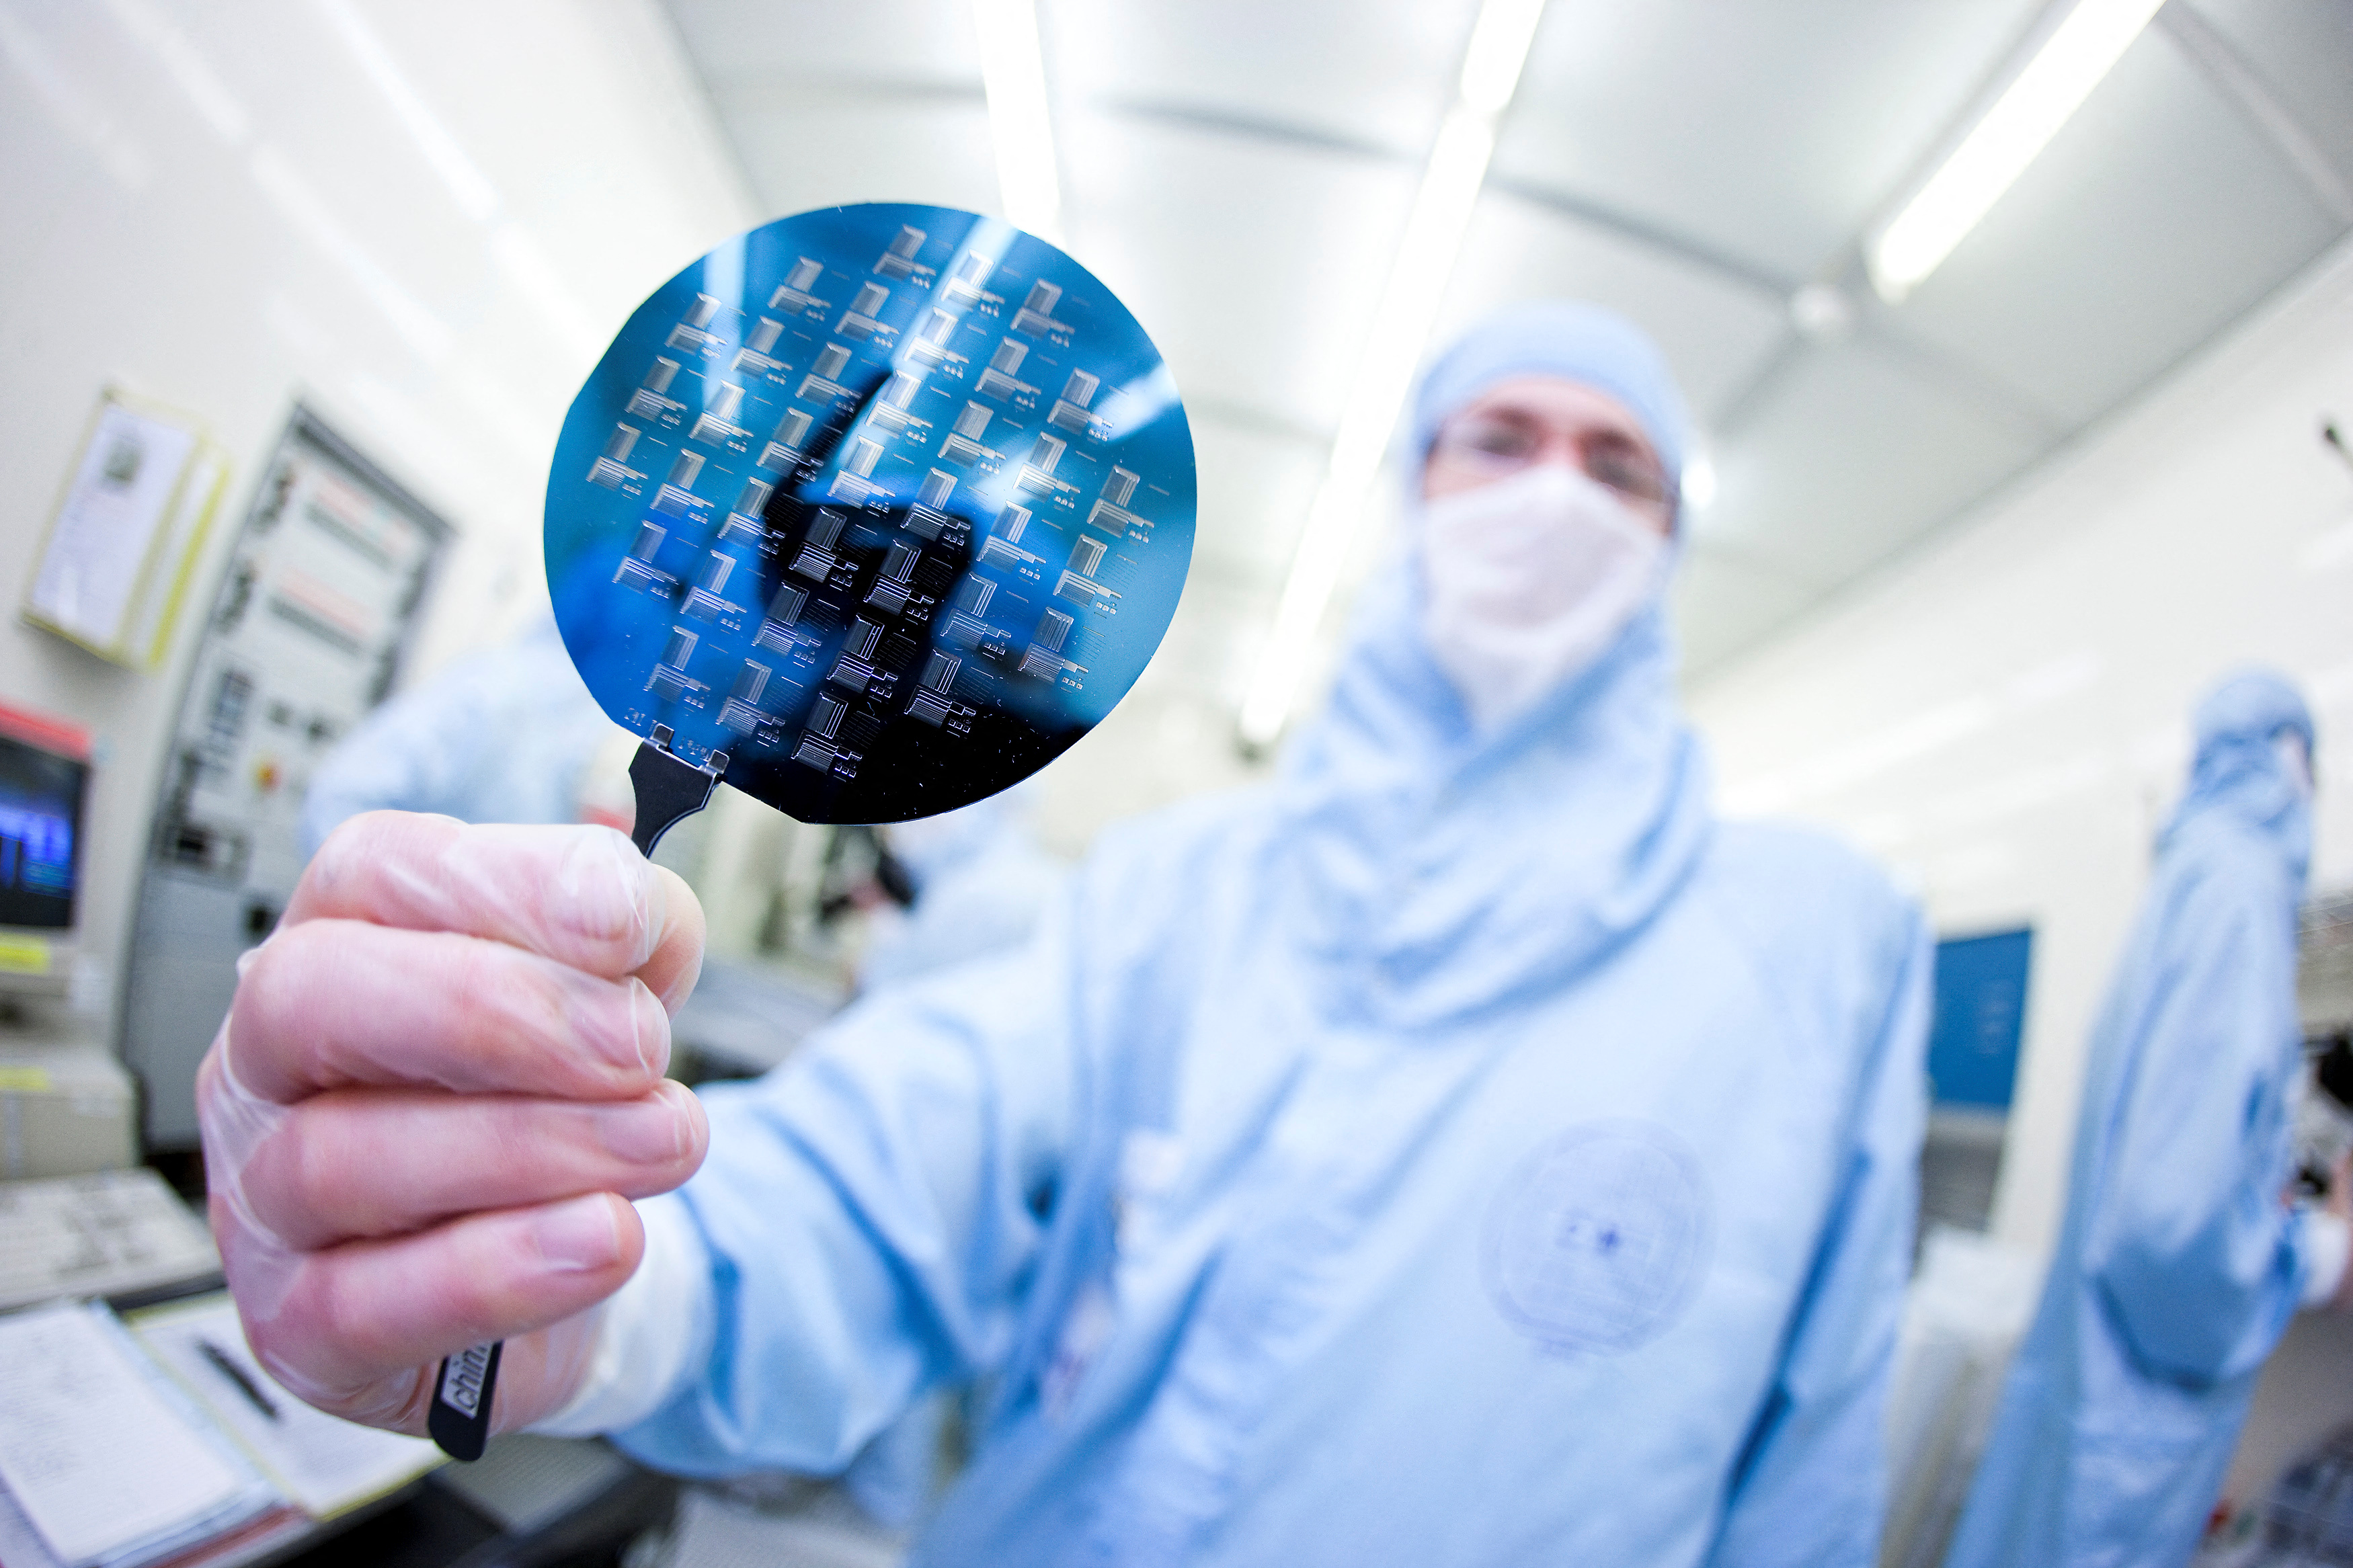 A scientist presents a silicon wafer during a media presentation in one of the low particle pollution nanofabrication clean rooms of the Swiss Federal Institute of Technology